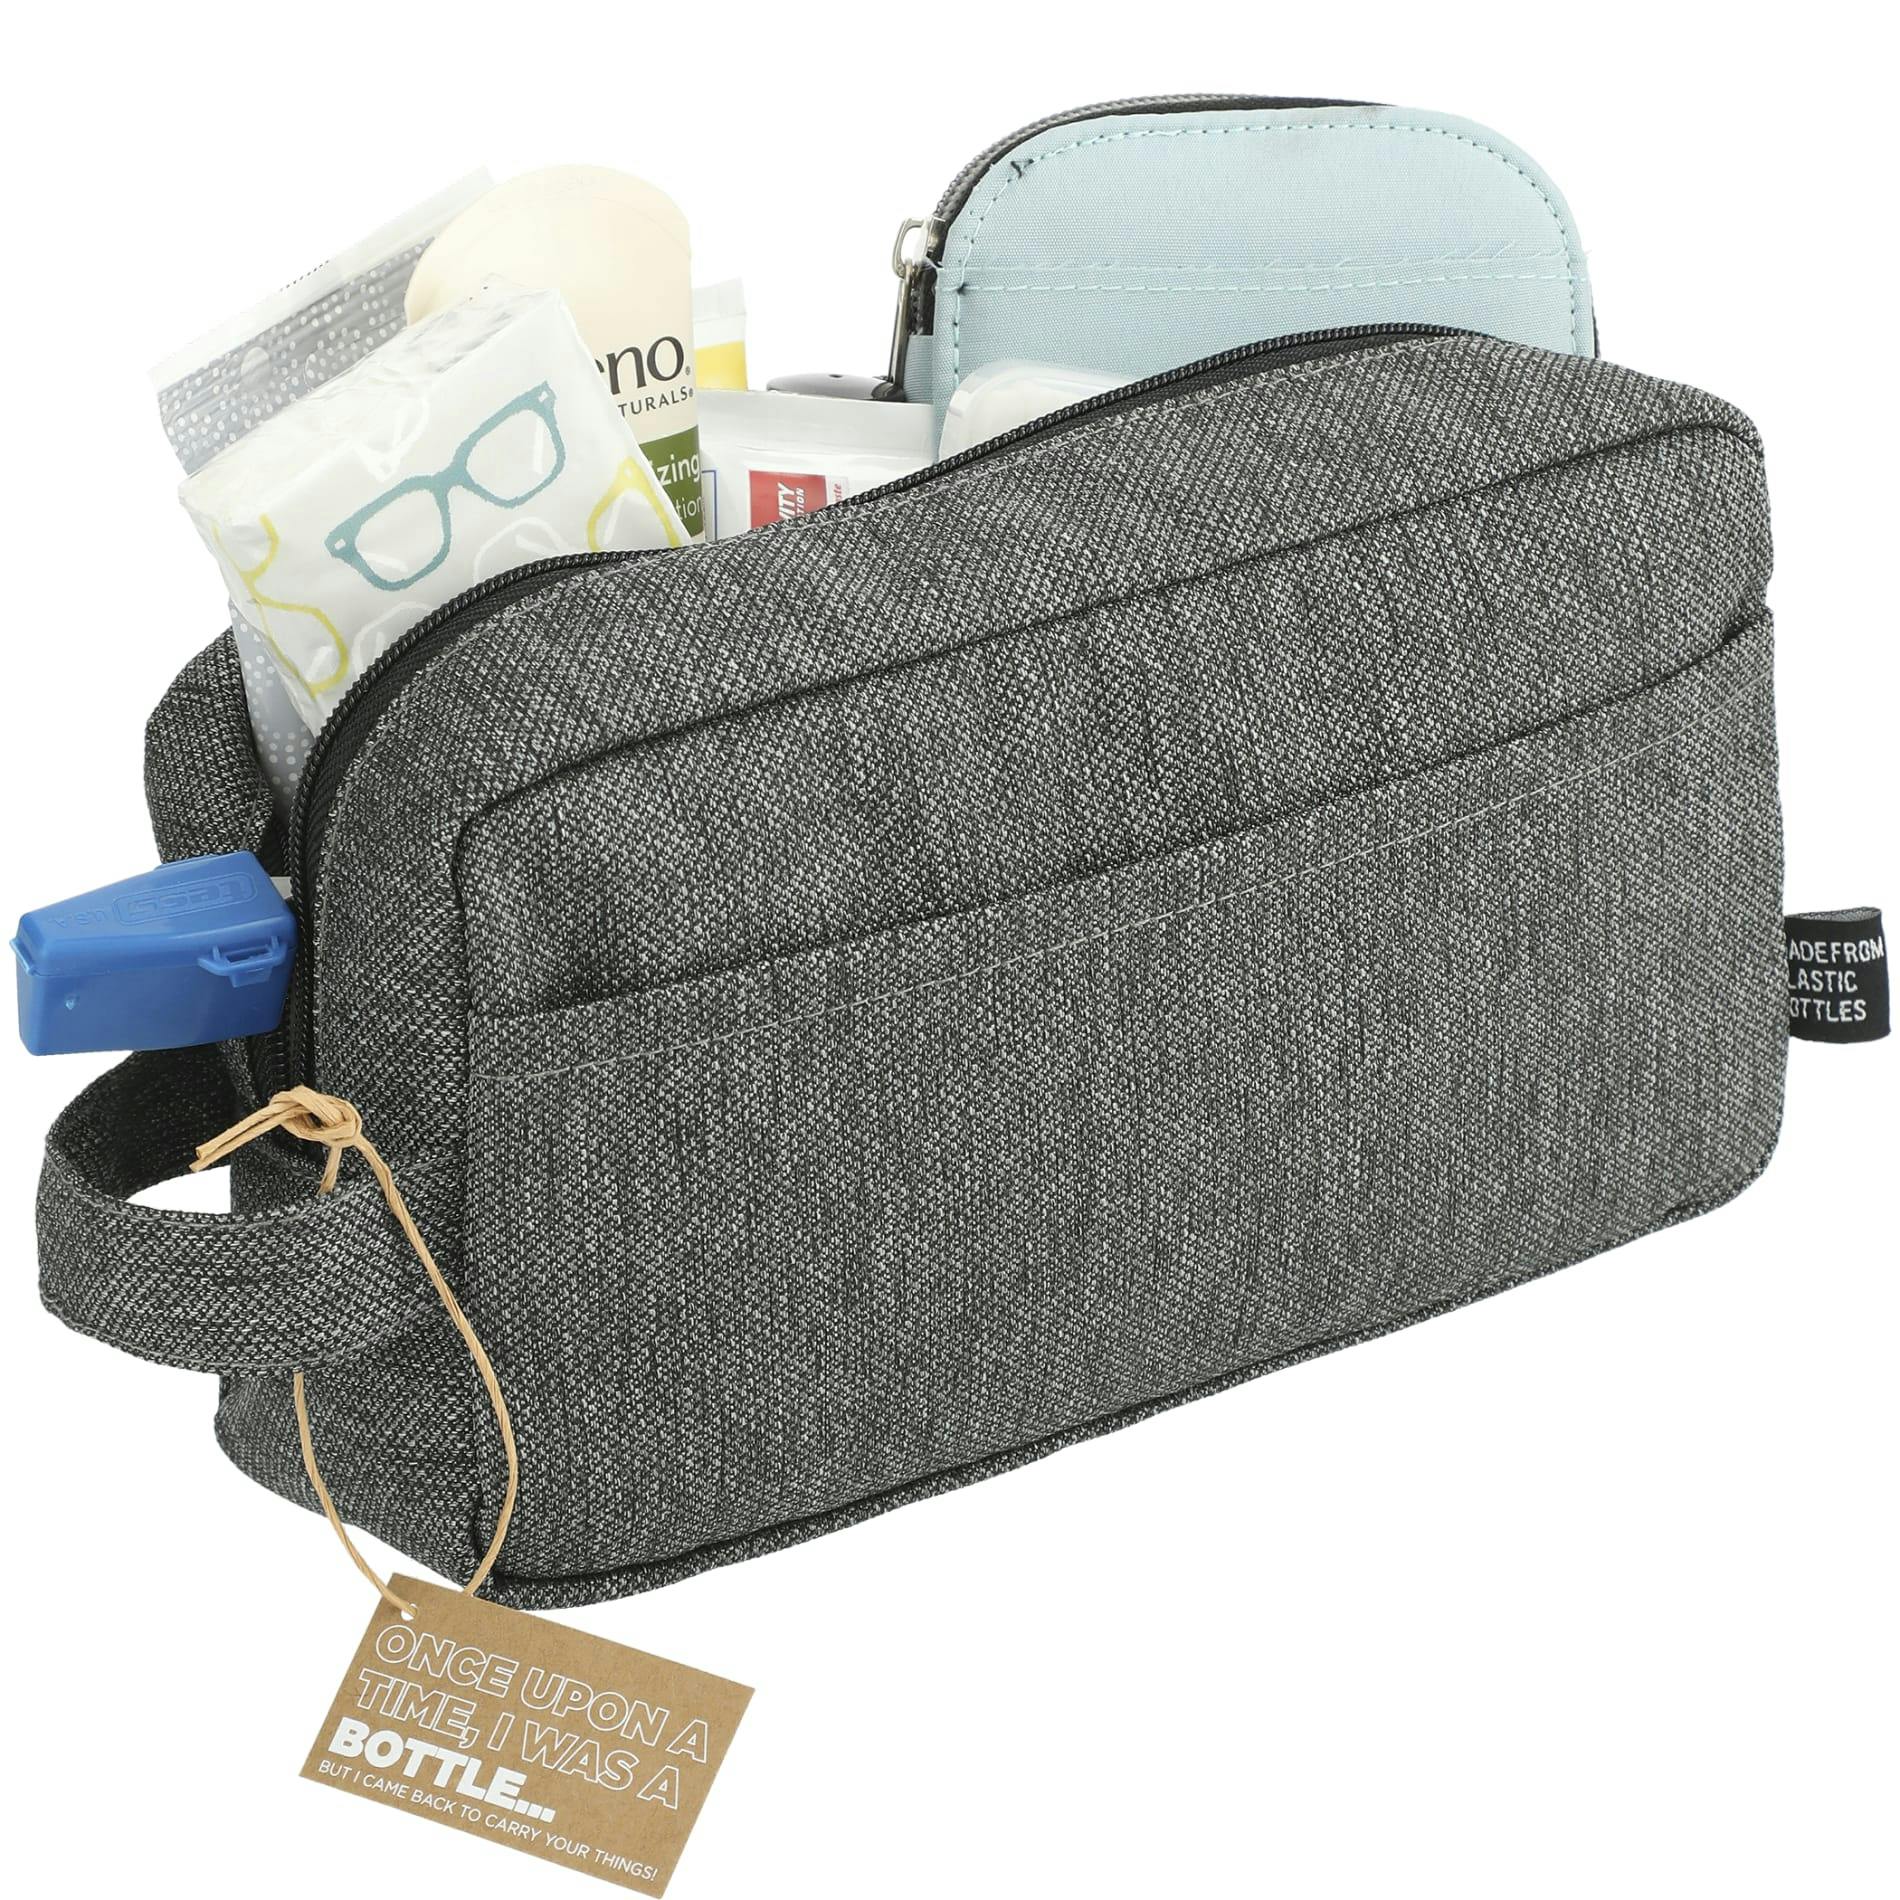 Vila Recycled Dopp Kit Pouch - additional Image 4